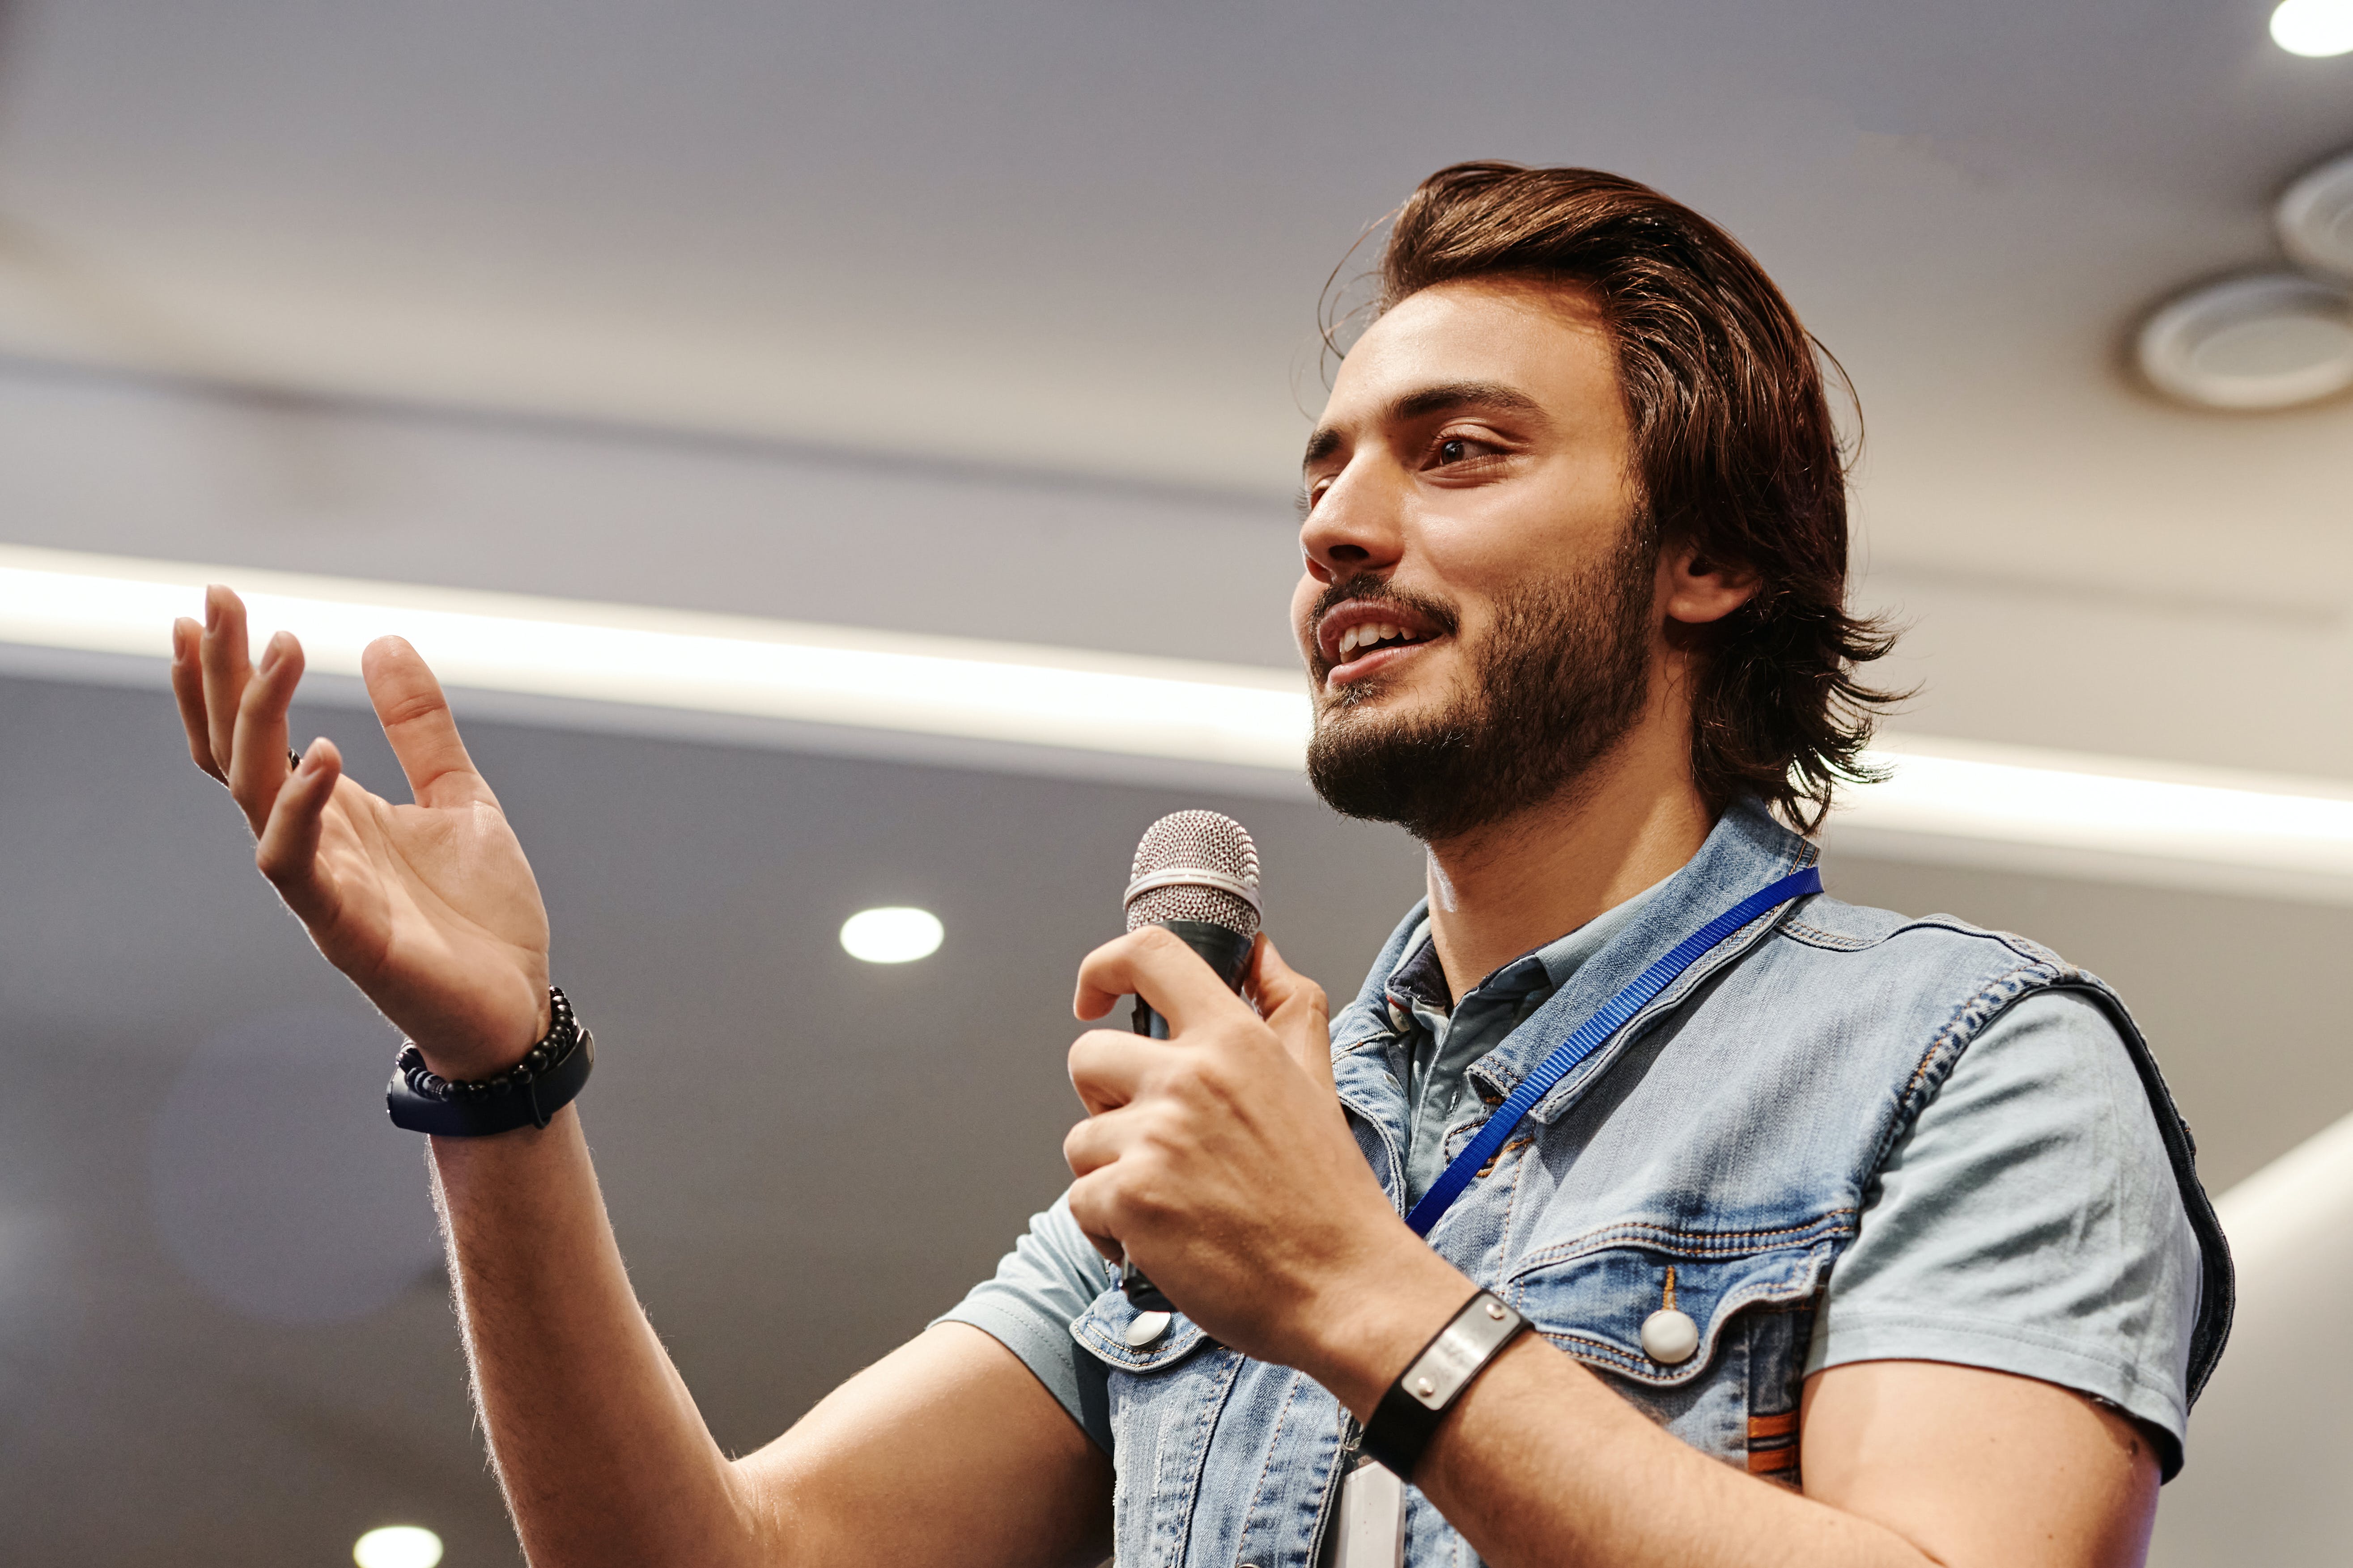 A man holding a microphone. | Source: Pexels